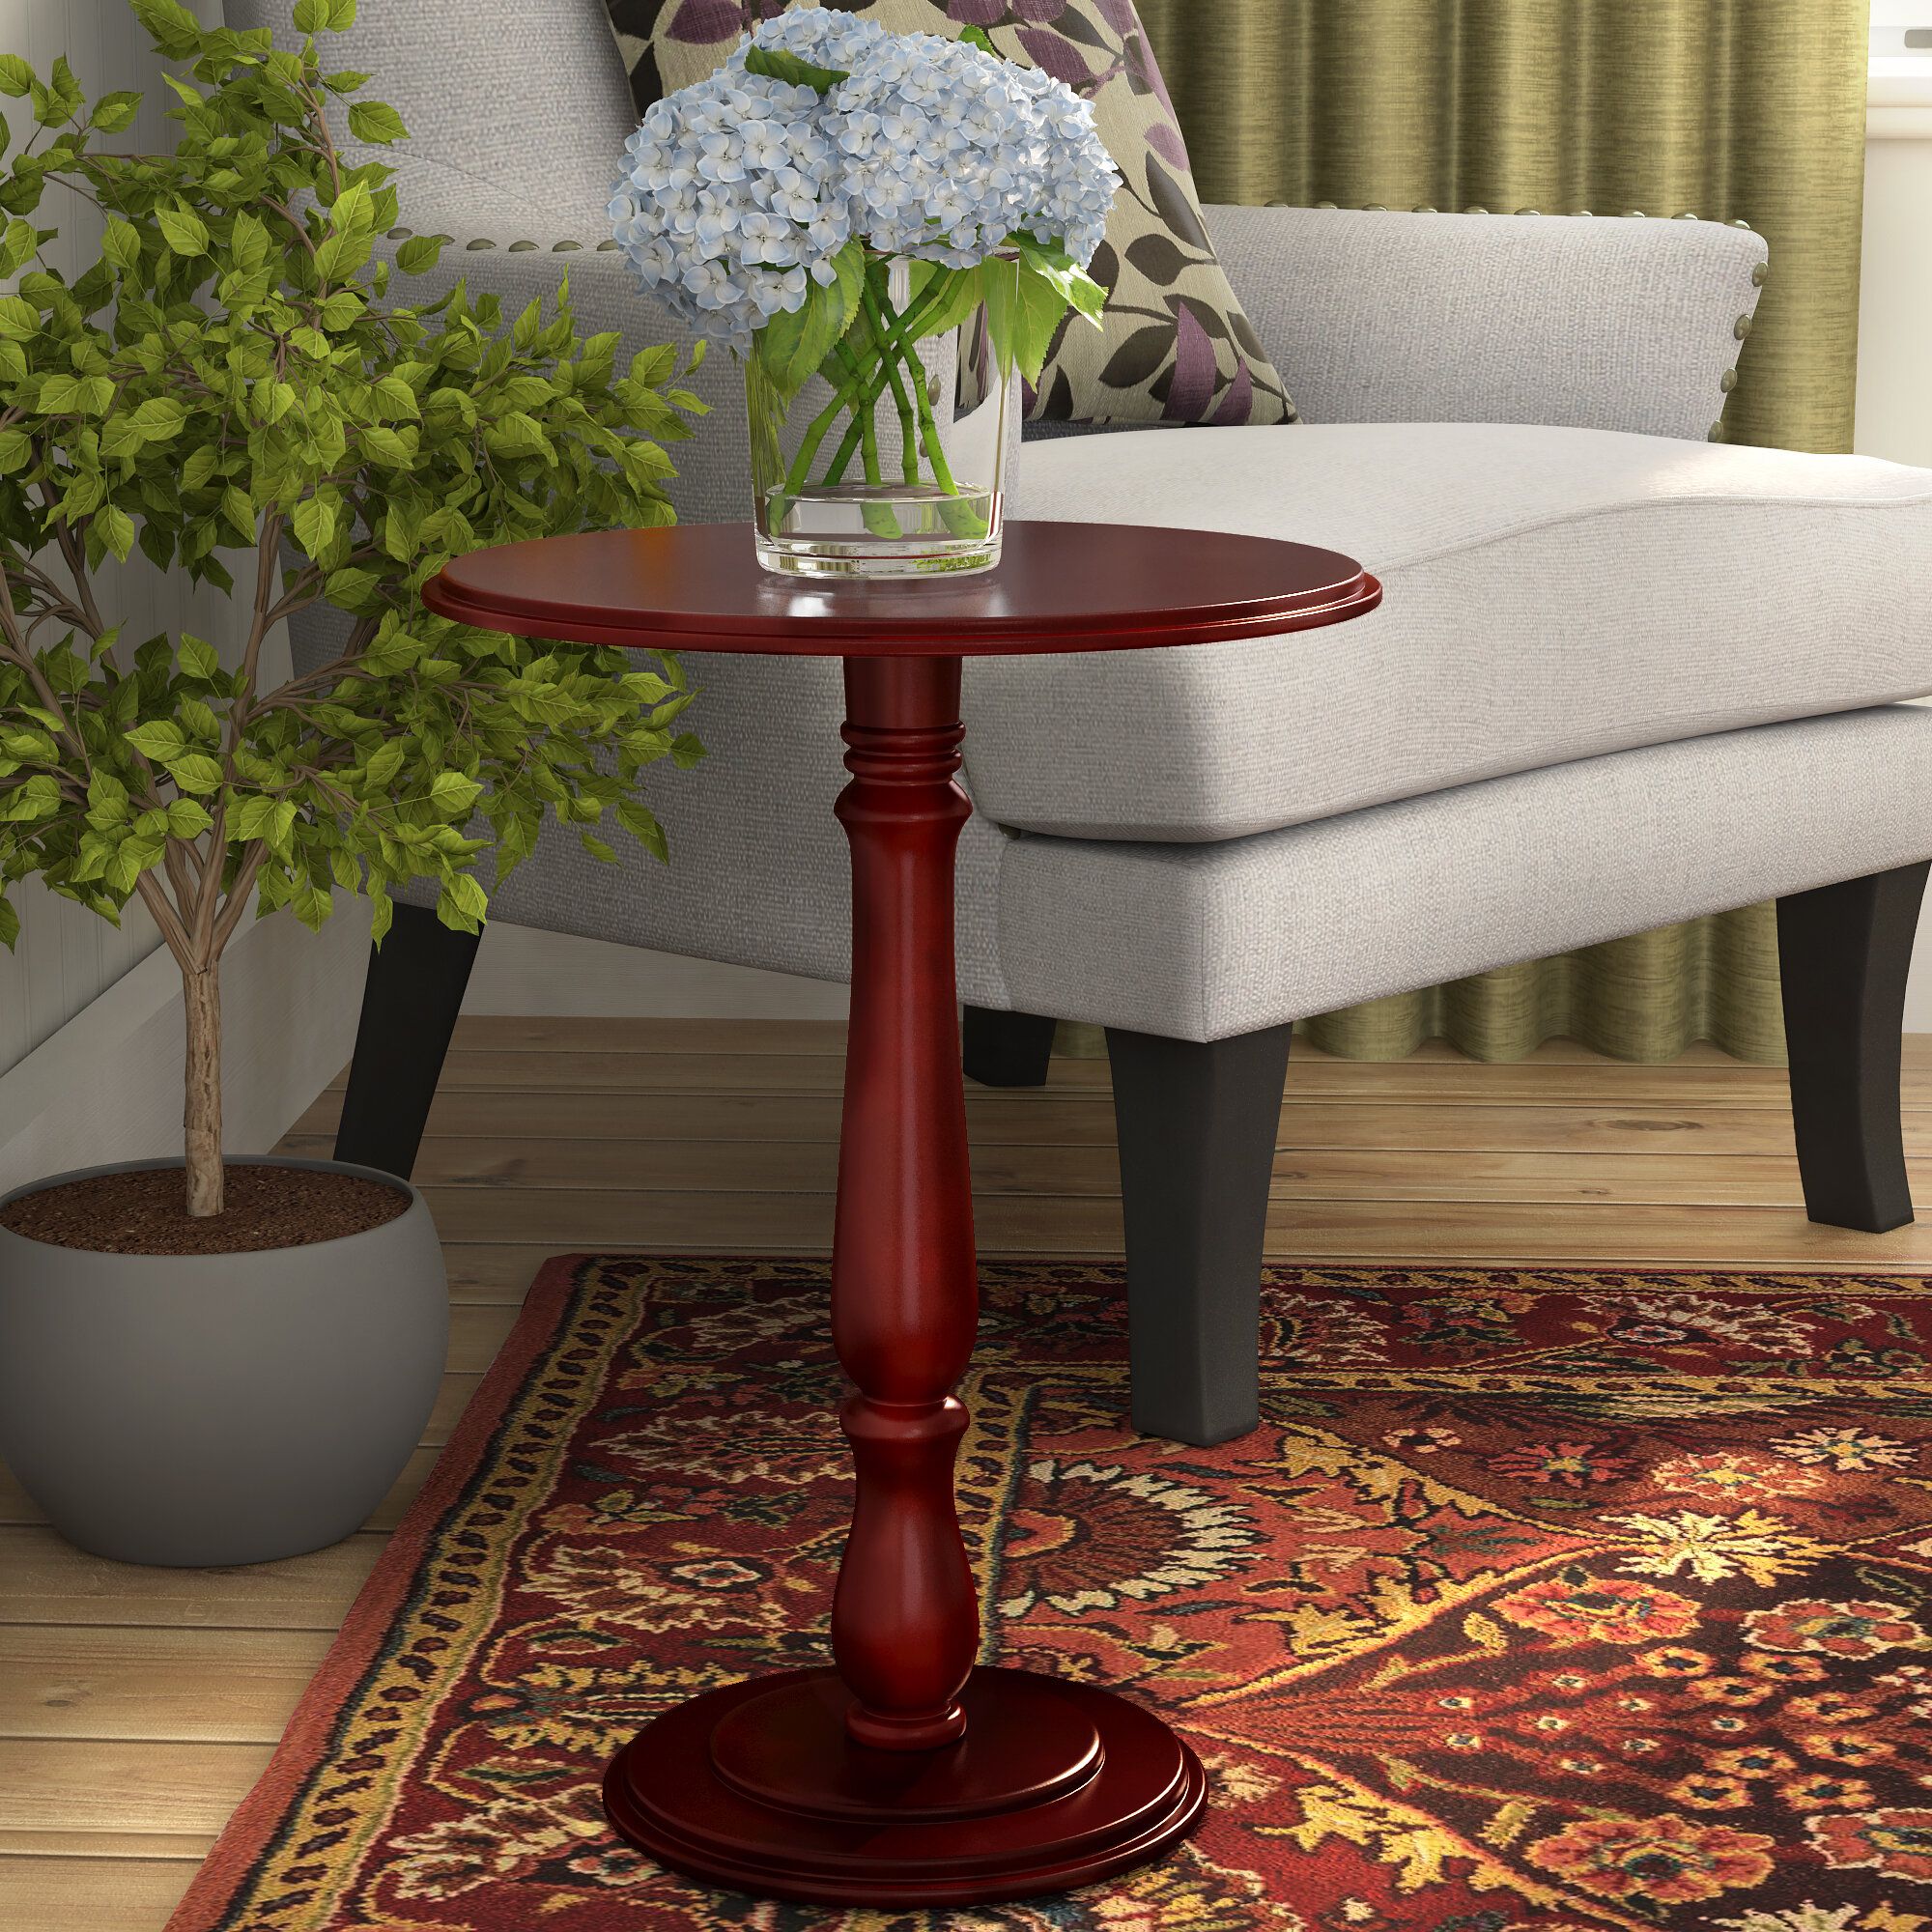 Charlton Home® Stehle Round Pedestal Solid Wood Plant Stand & Reviews |  Wayfair With Regard To Cherry Pedestal Plant Stands (View 14 of 15)